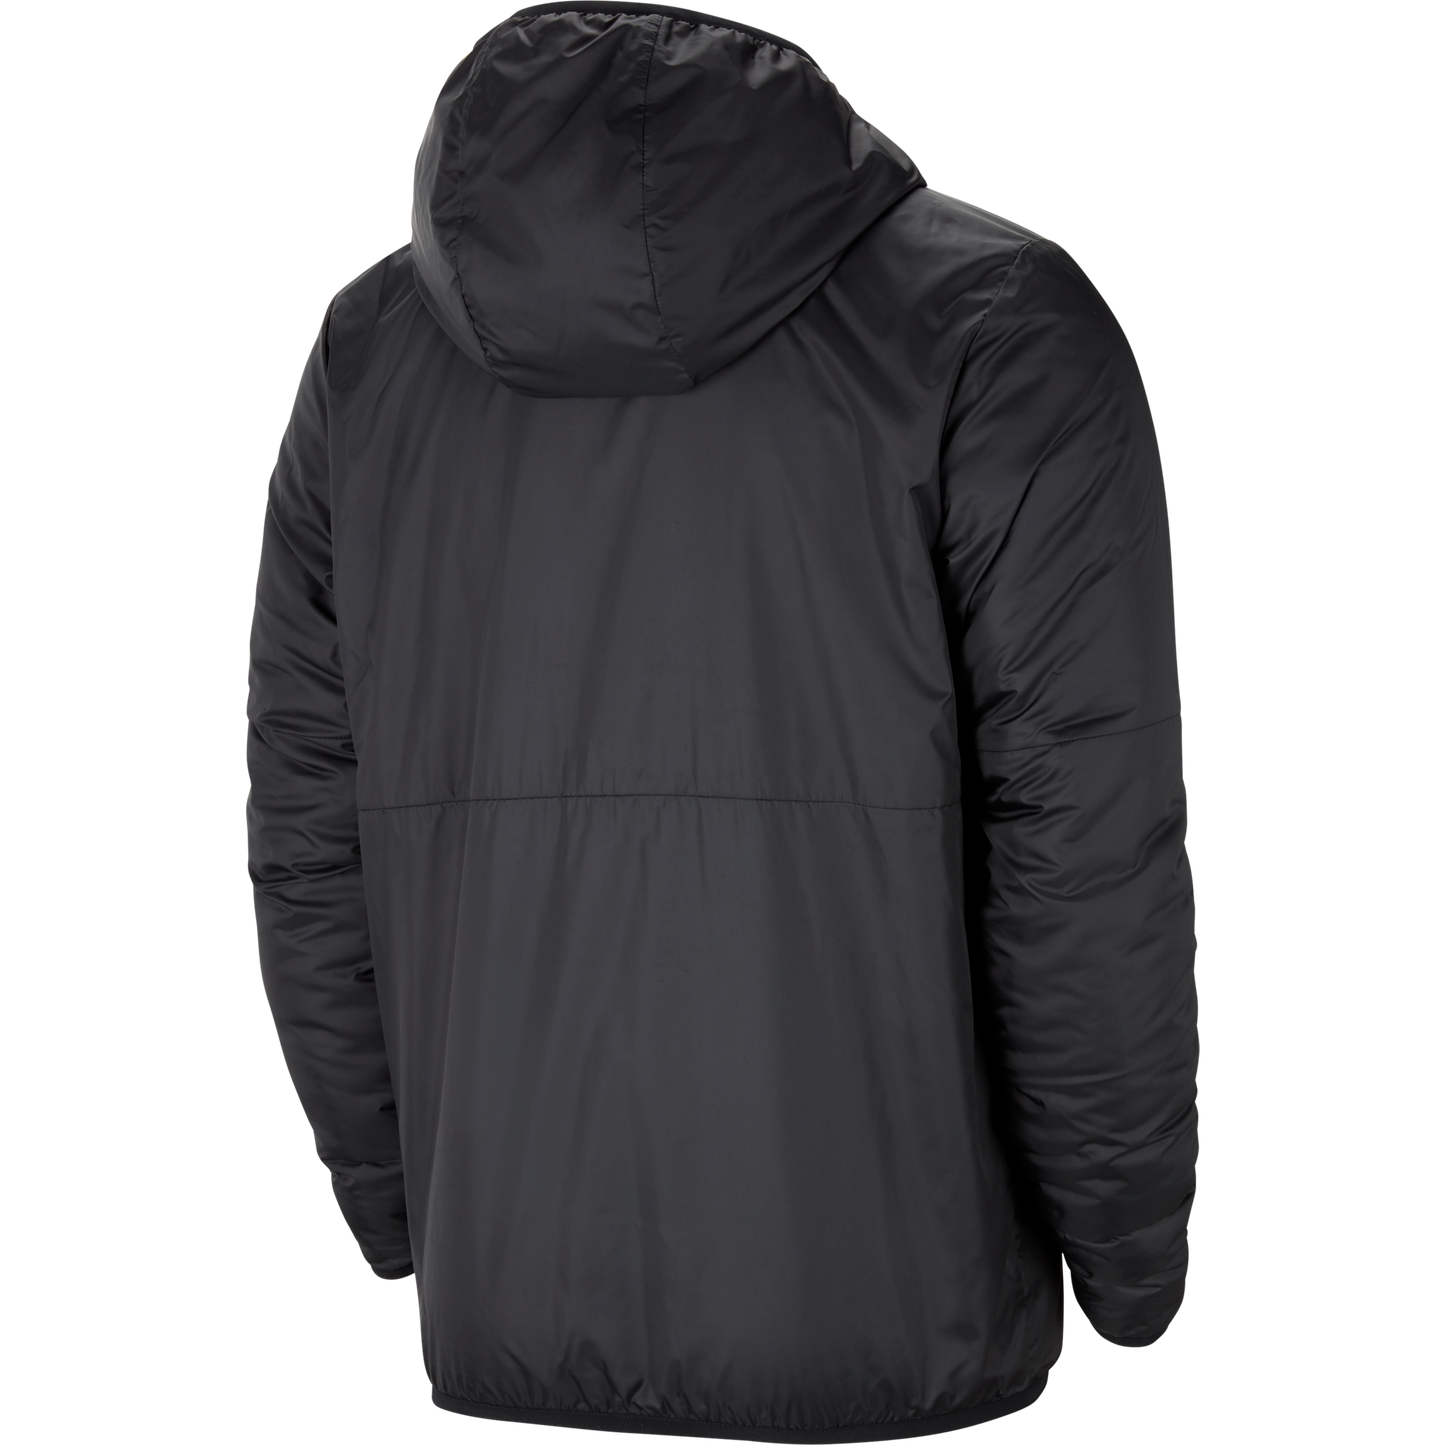 WOODLEIGH FC NIKE THERMAL FALL JACKET - MEN'S